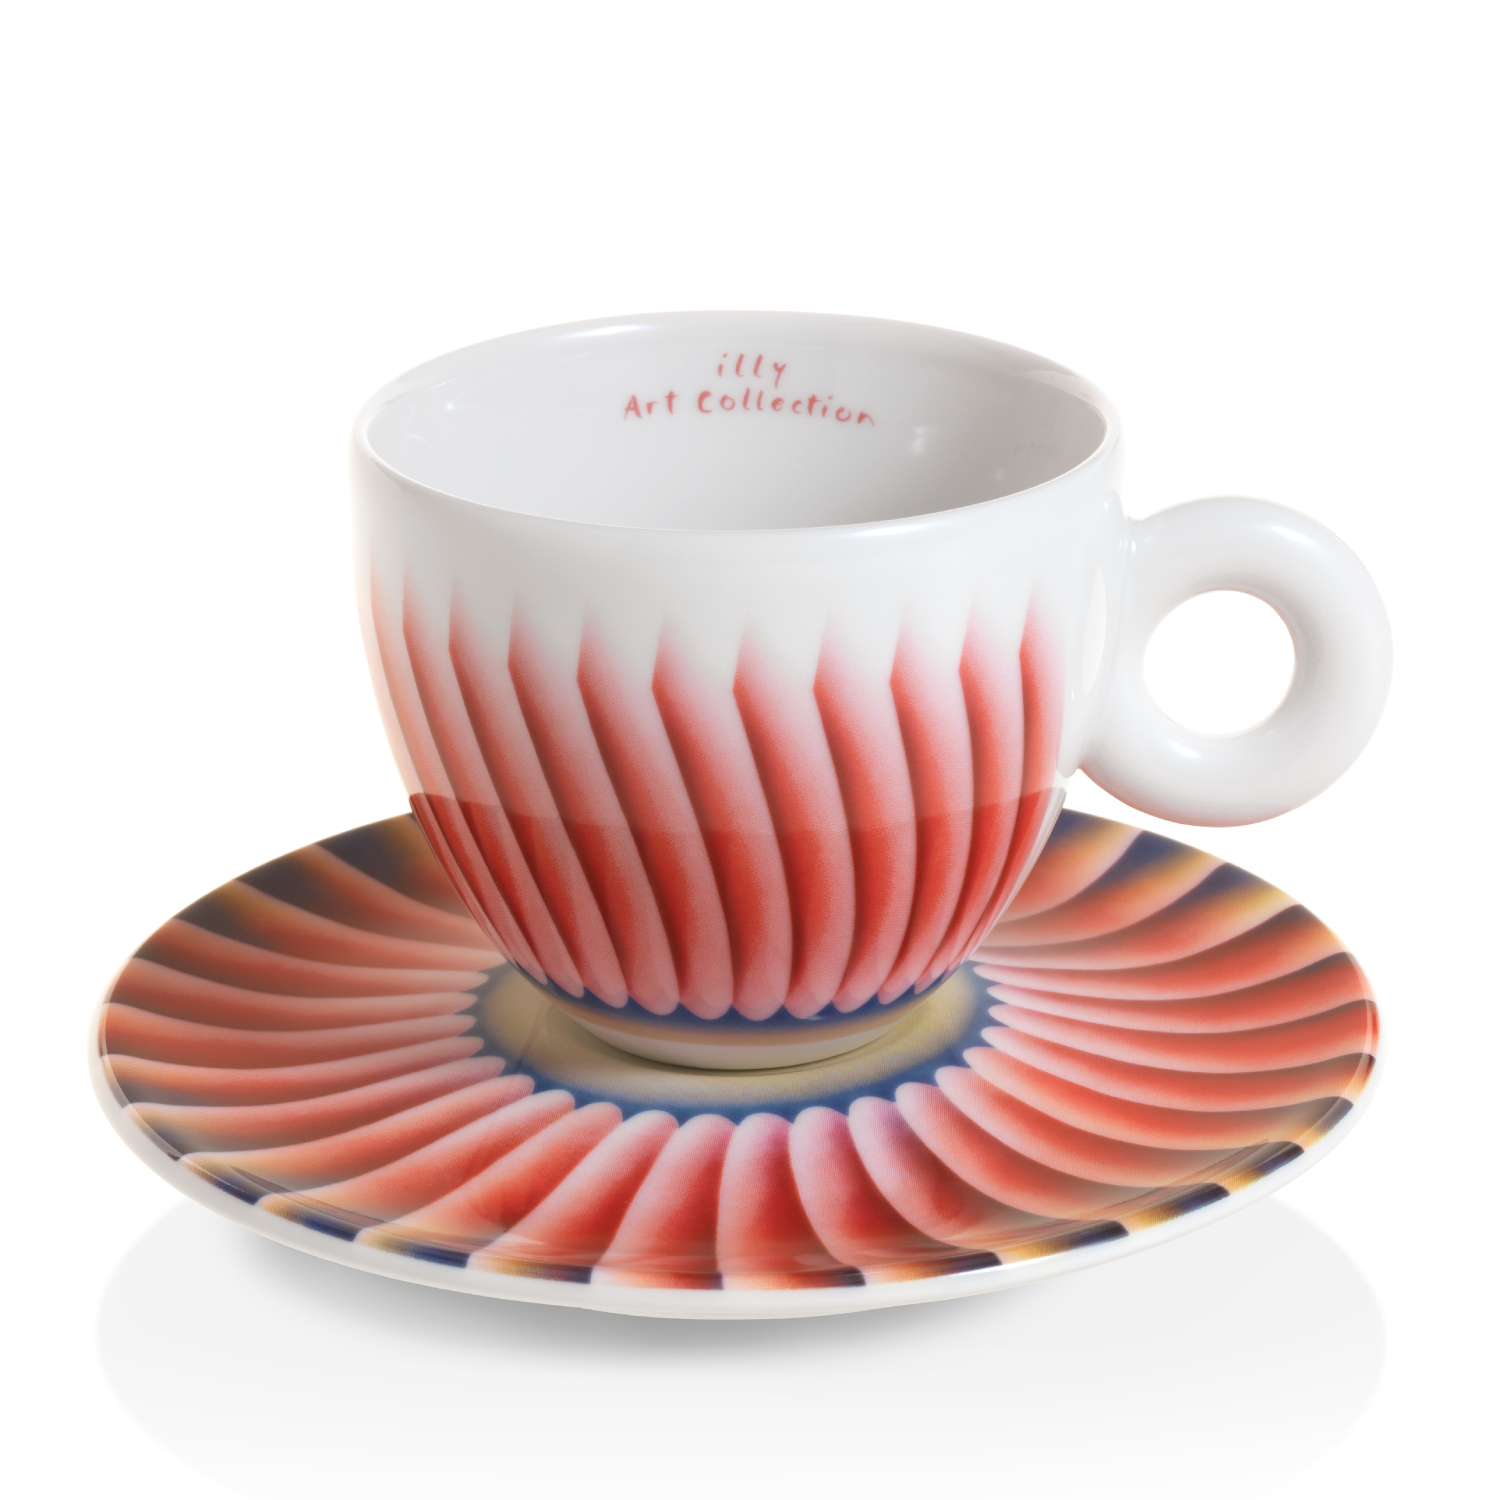 illy Art Collection JUDY CHICAGO Σετ Δώρου 2 Cappuccino Cups, Φλιτζάνια , 02-02-2016